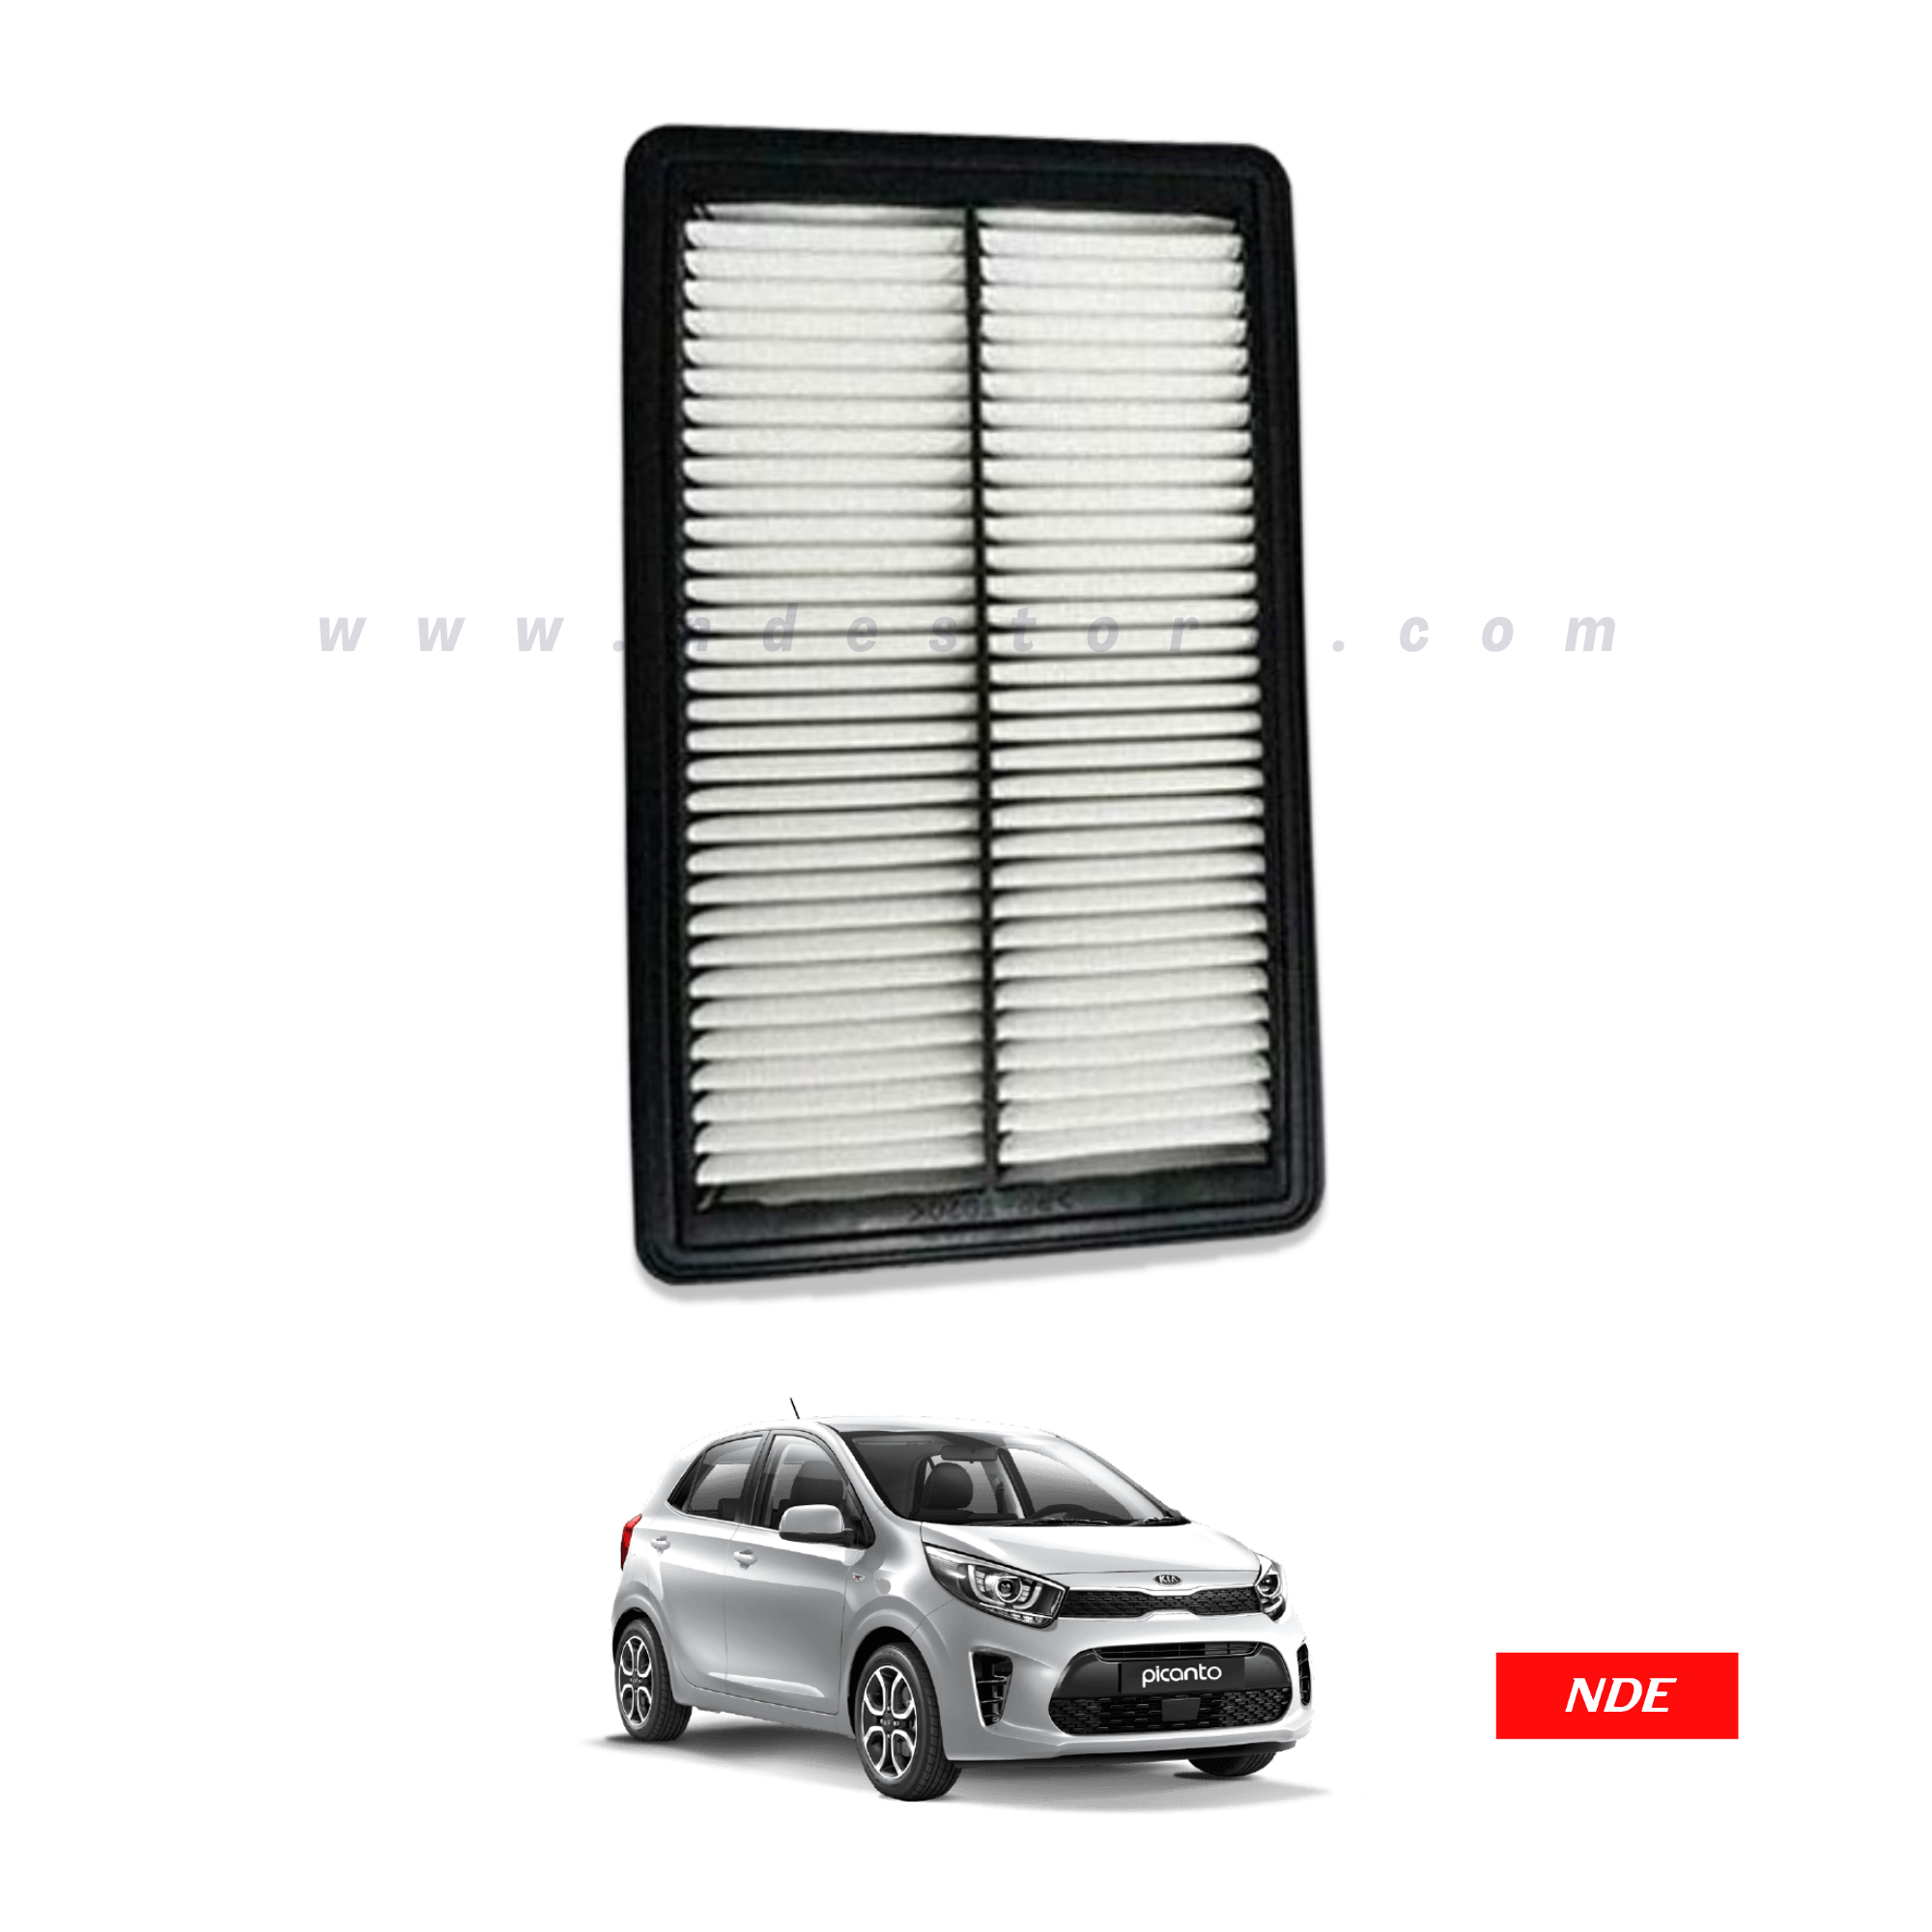 AIR FILTER ELEMENT SUB ASSY FOR KIA PICANTO (IMPORTED)